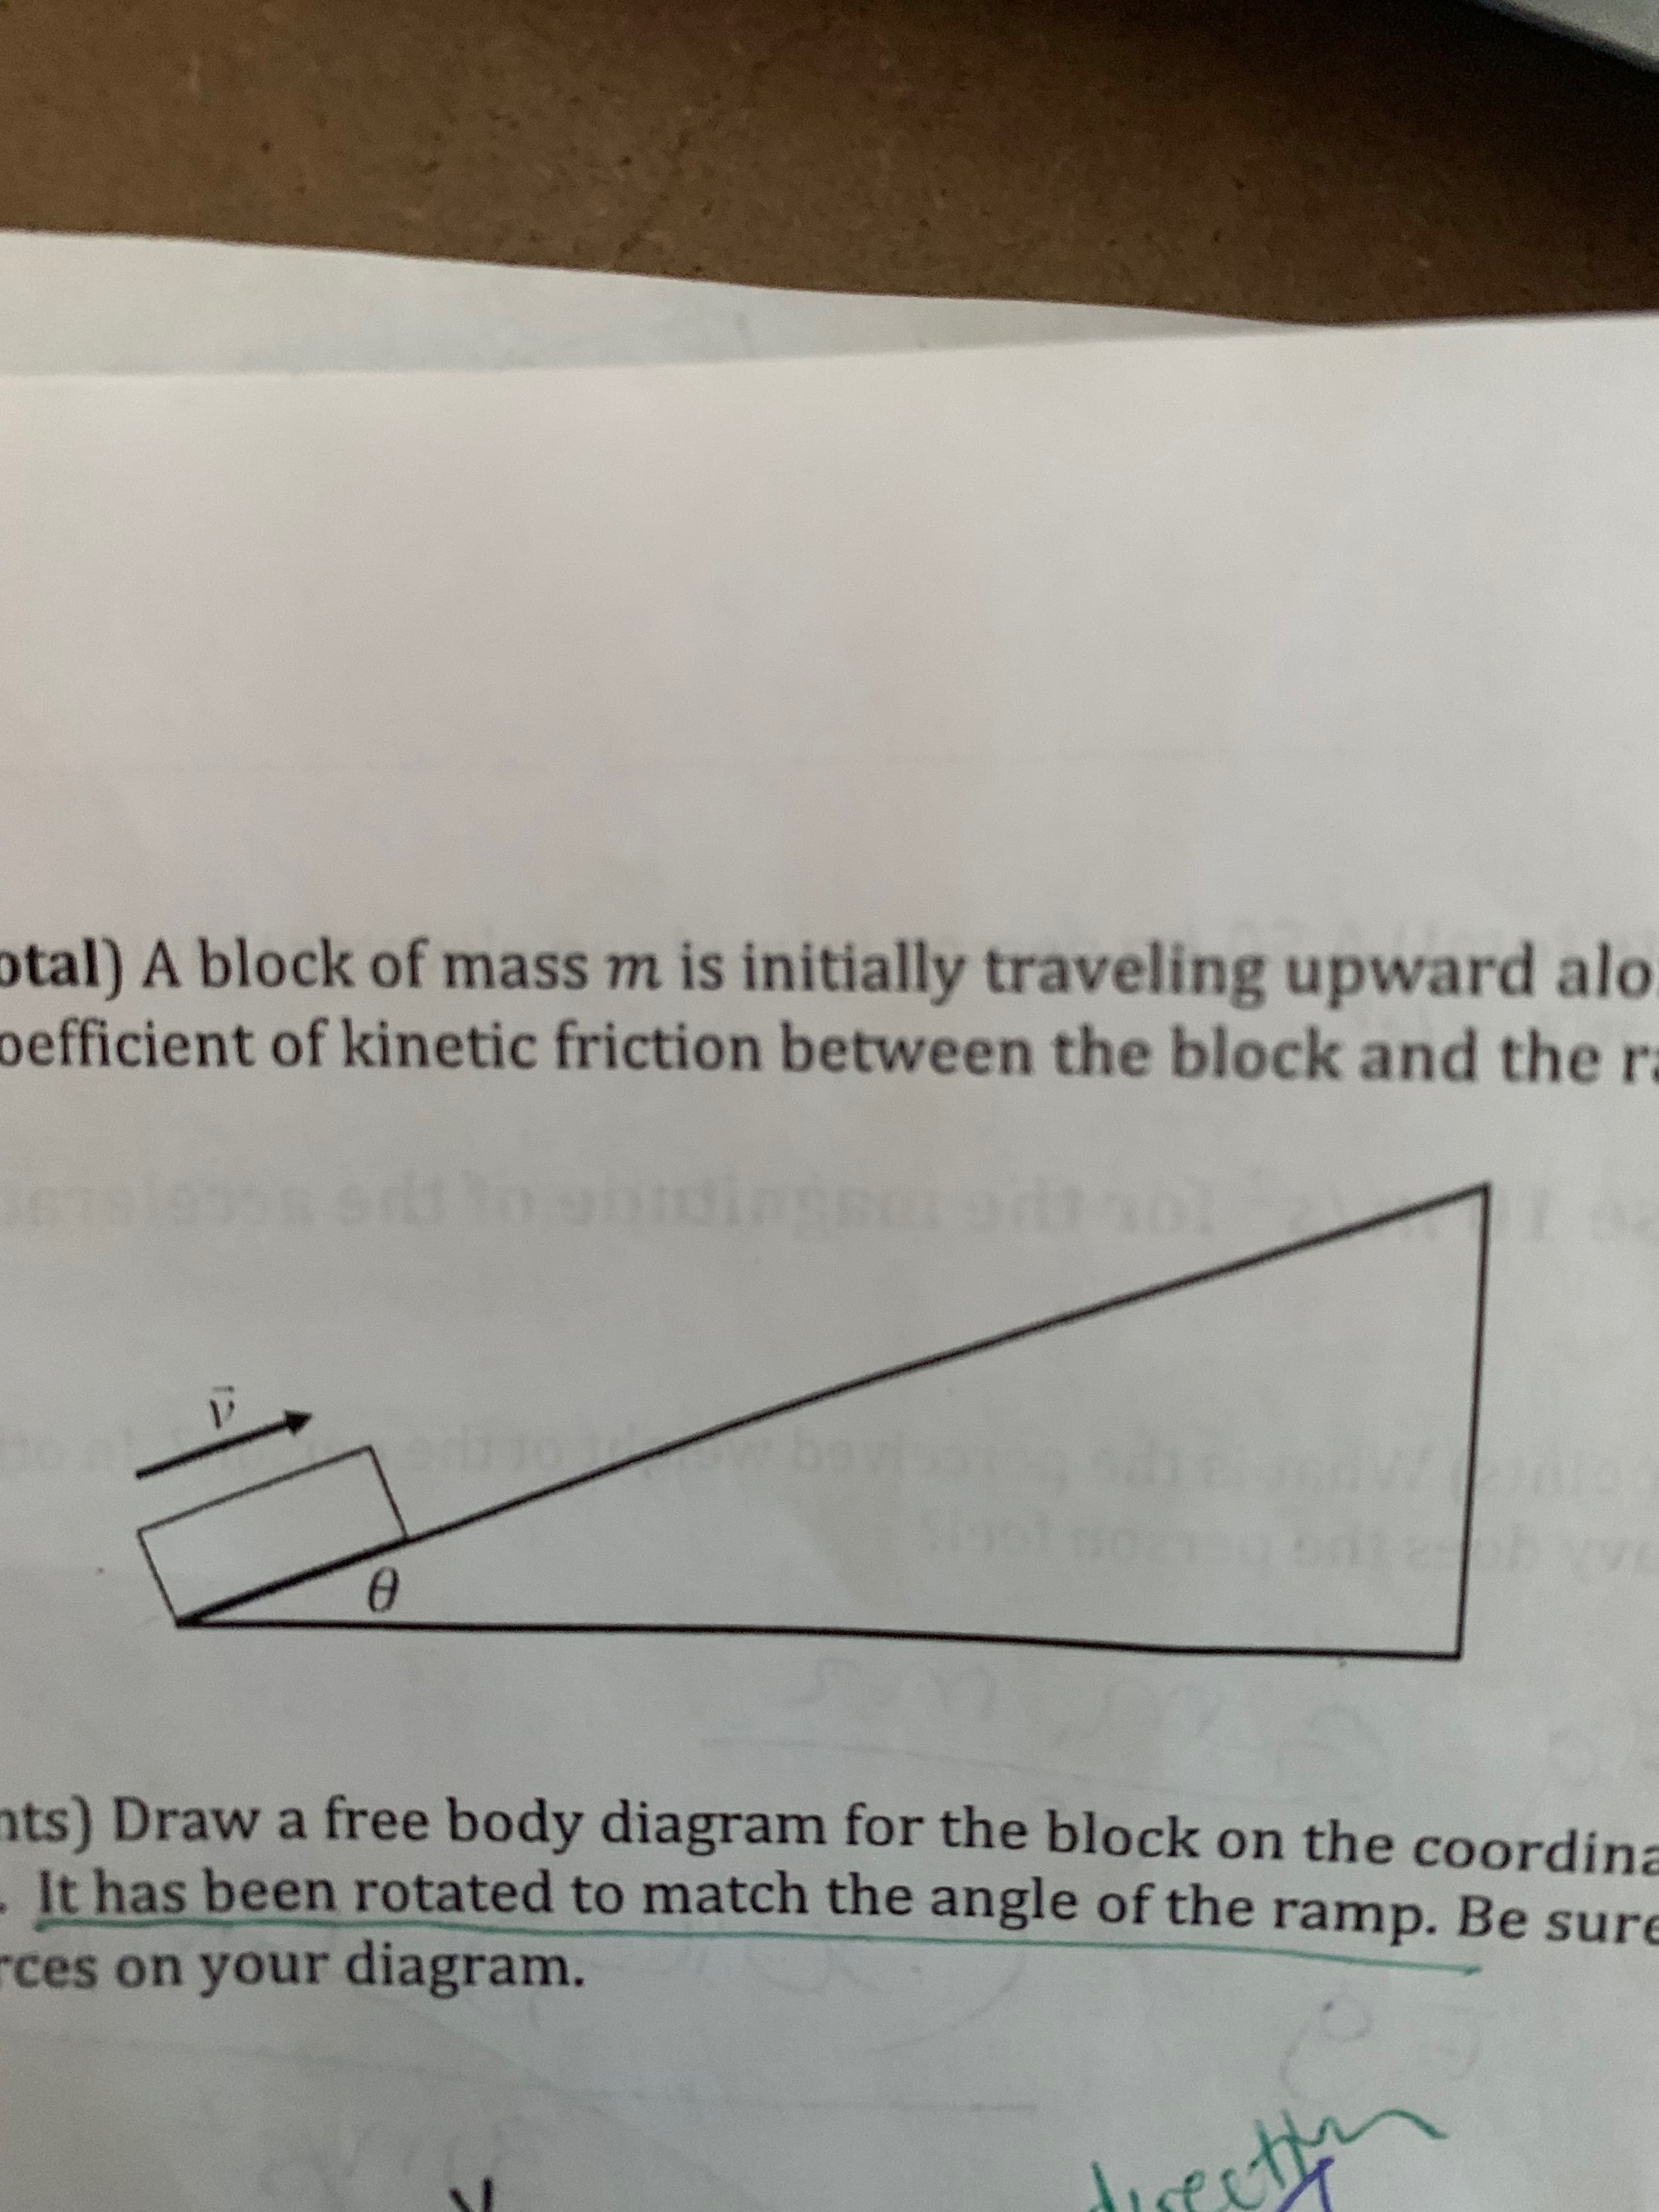 otal) A block of mass m is initially traveling upward alo
oefficient of kinetic friction between the block and the r
ts) Draw a free body diagram for the block on the coordina
It has been rotated to match the angle of the ramp. Be sure
ces on your diagram.
12
